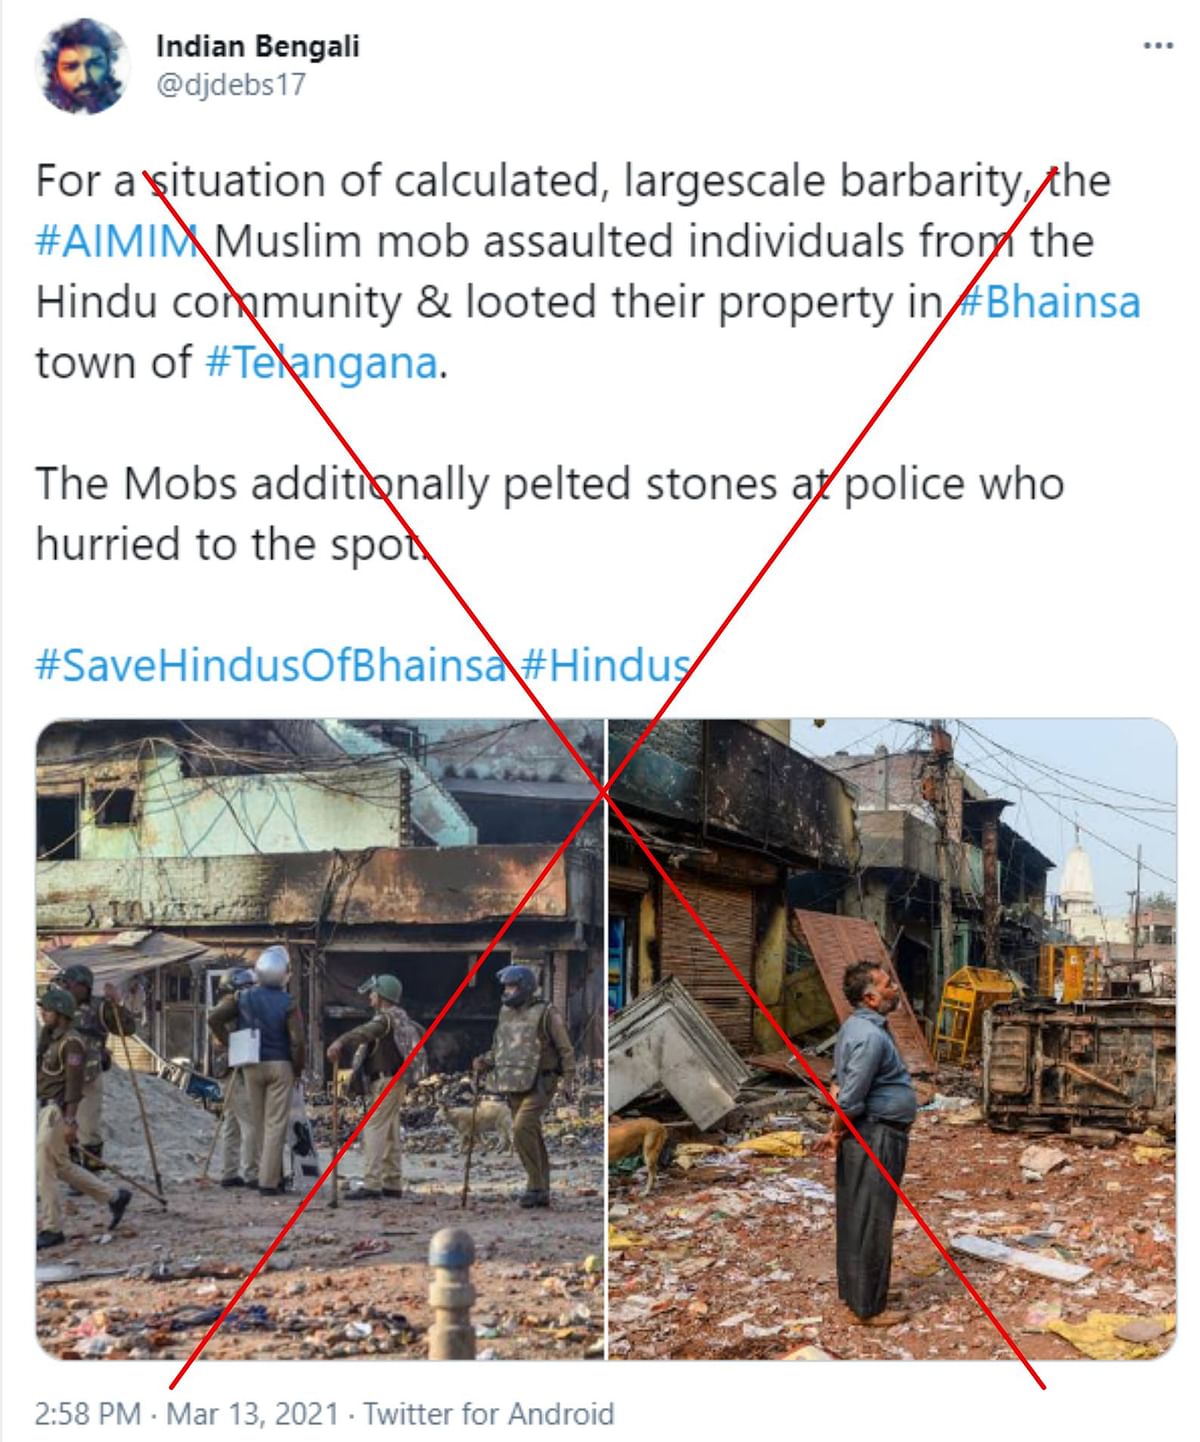 The images are being shared in context of the recent communal clash in Telangana’s Bhainsa.